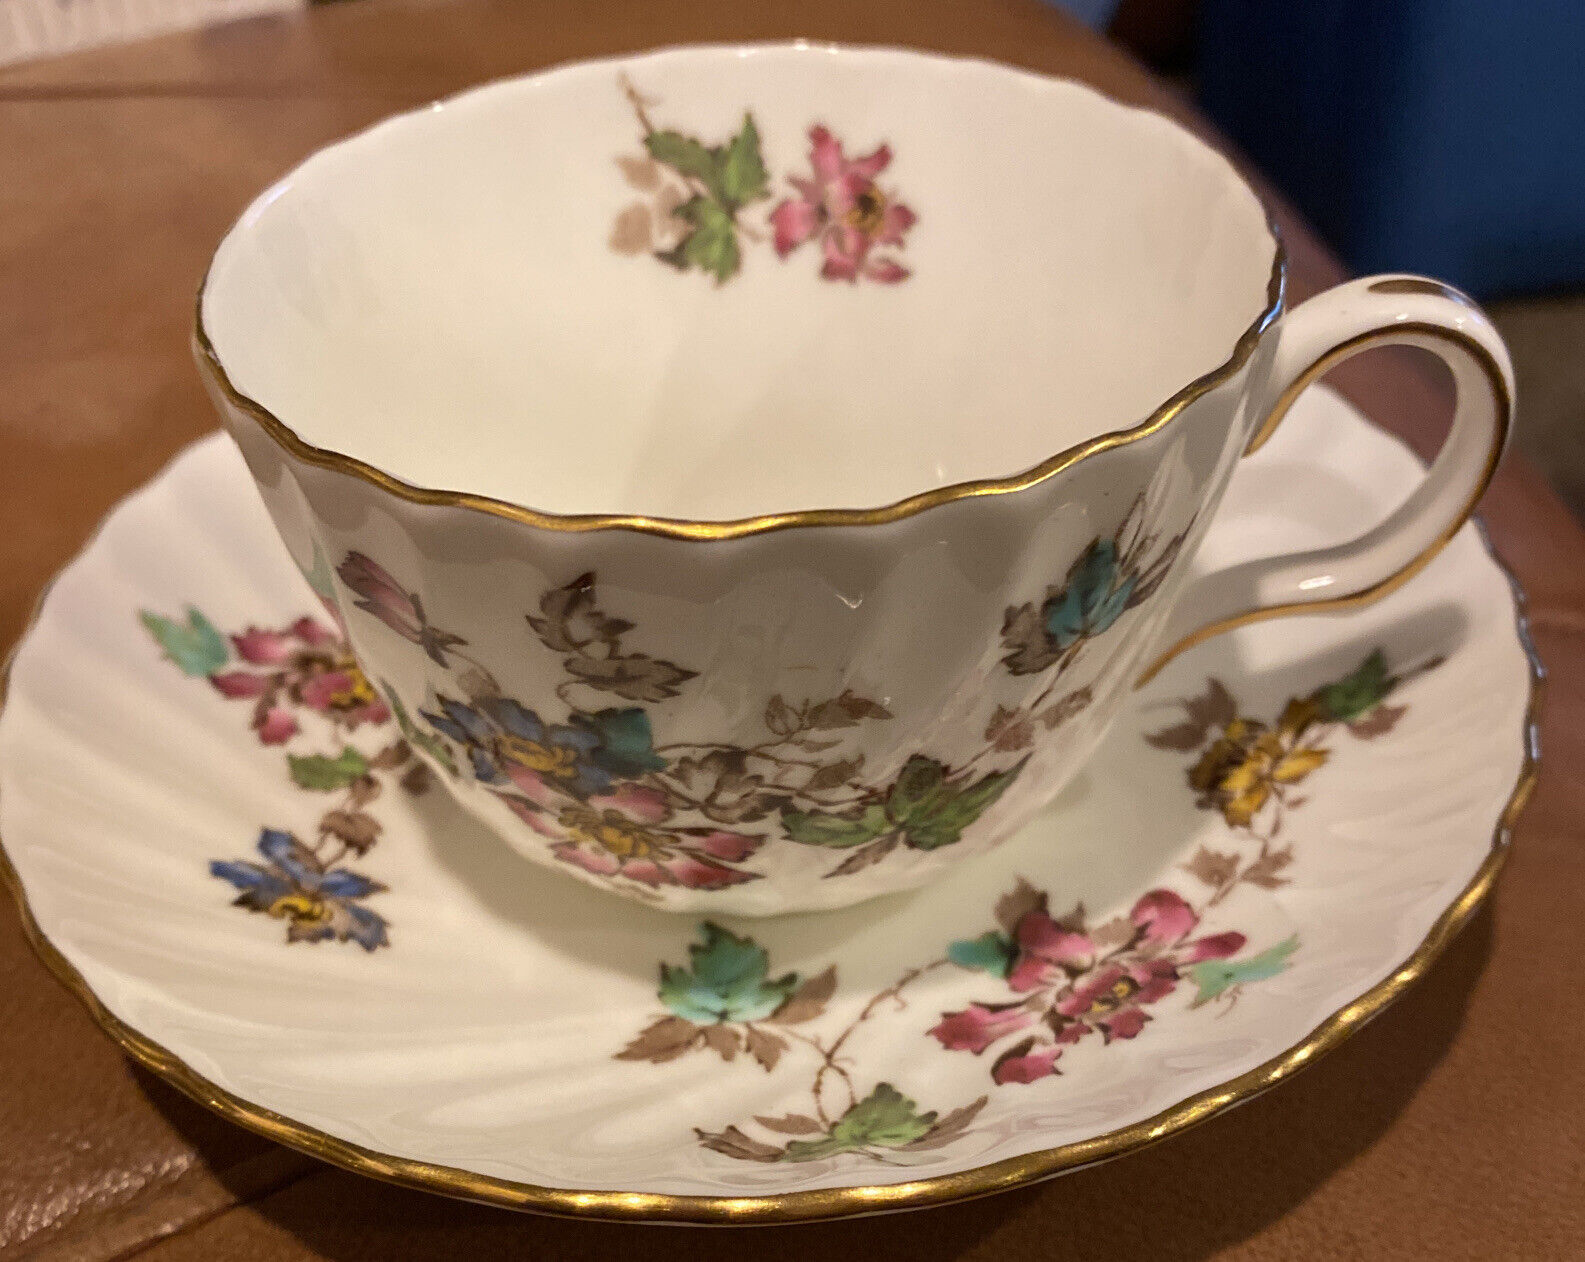 Vintage “MINTON” Cup & Saucer “VERMONT” Pattern Made In England